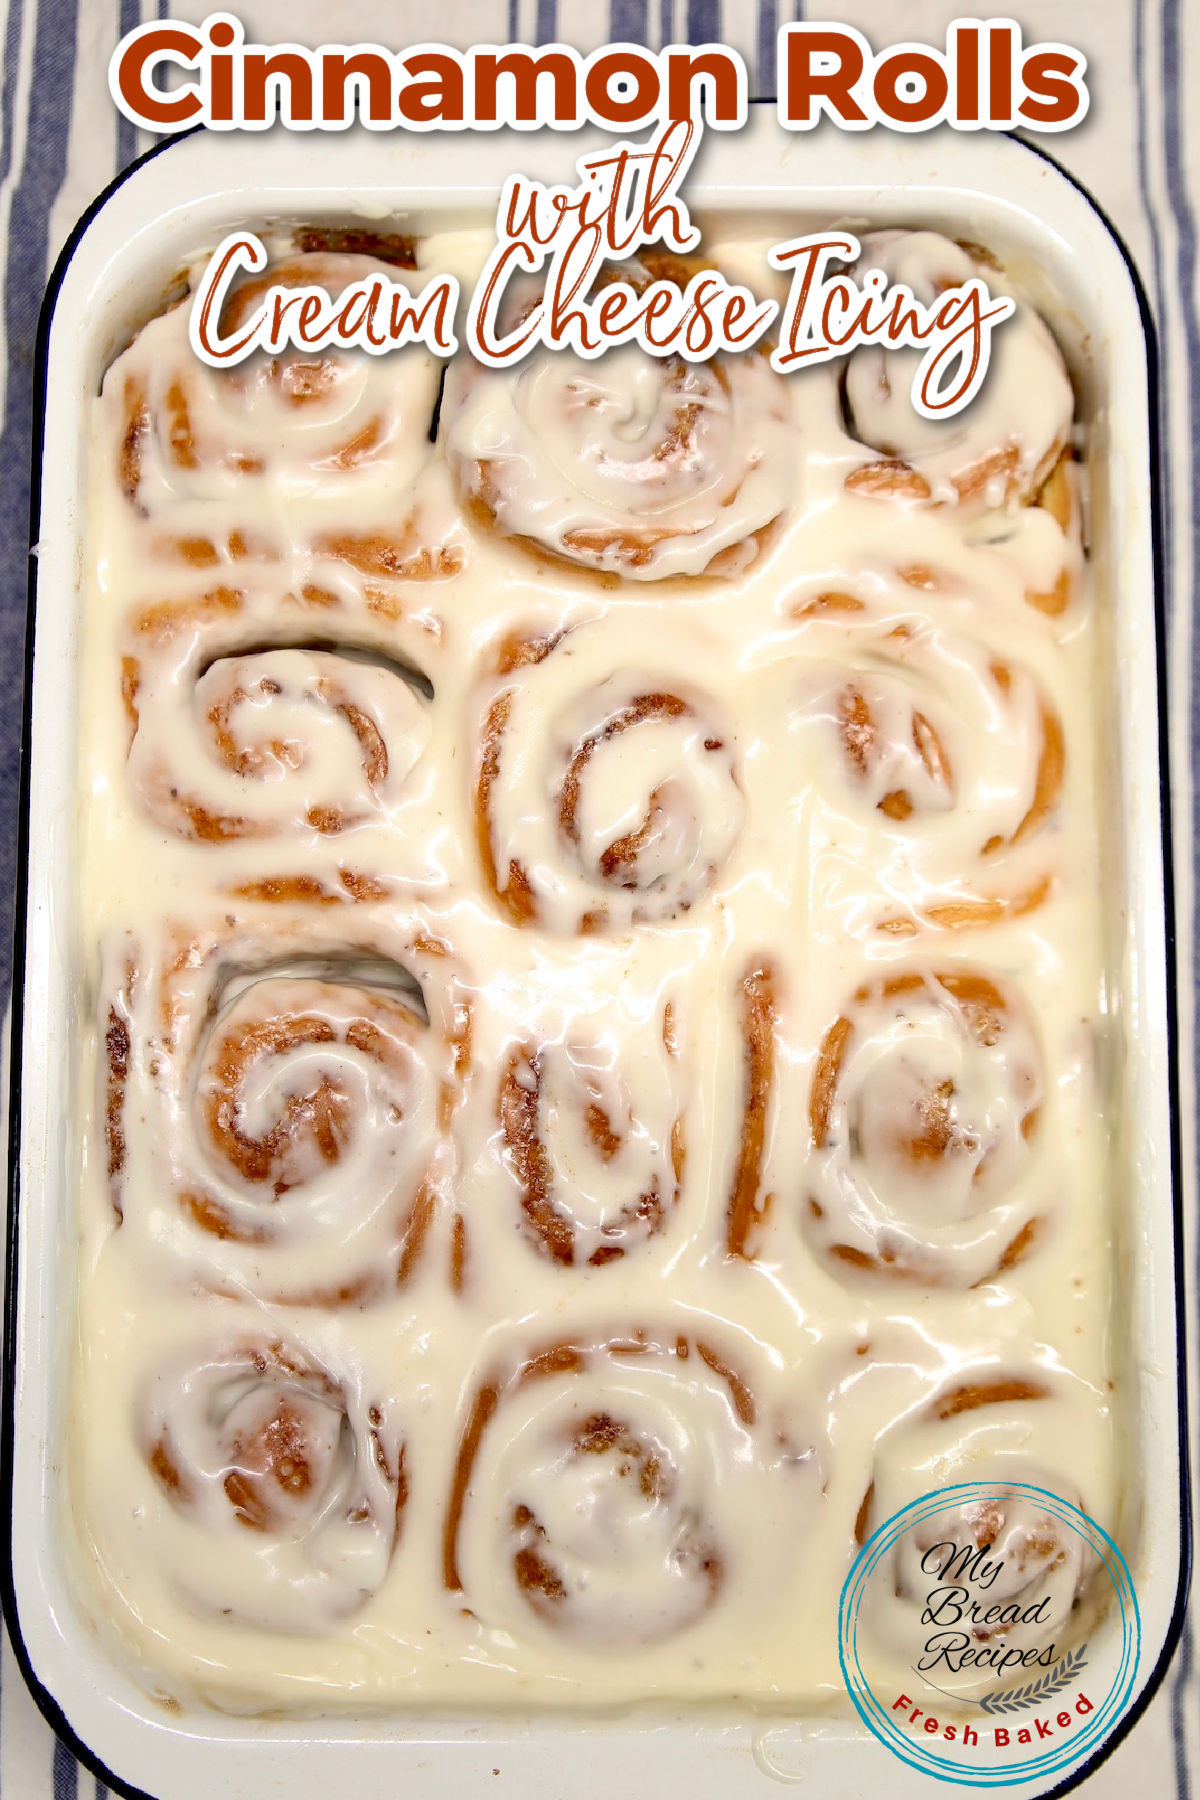 Pan of cinnamon rolls with cream cheese icing.